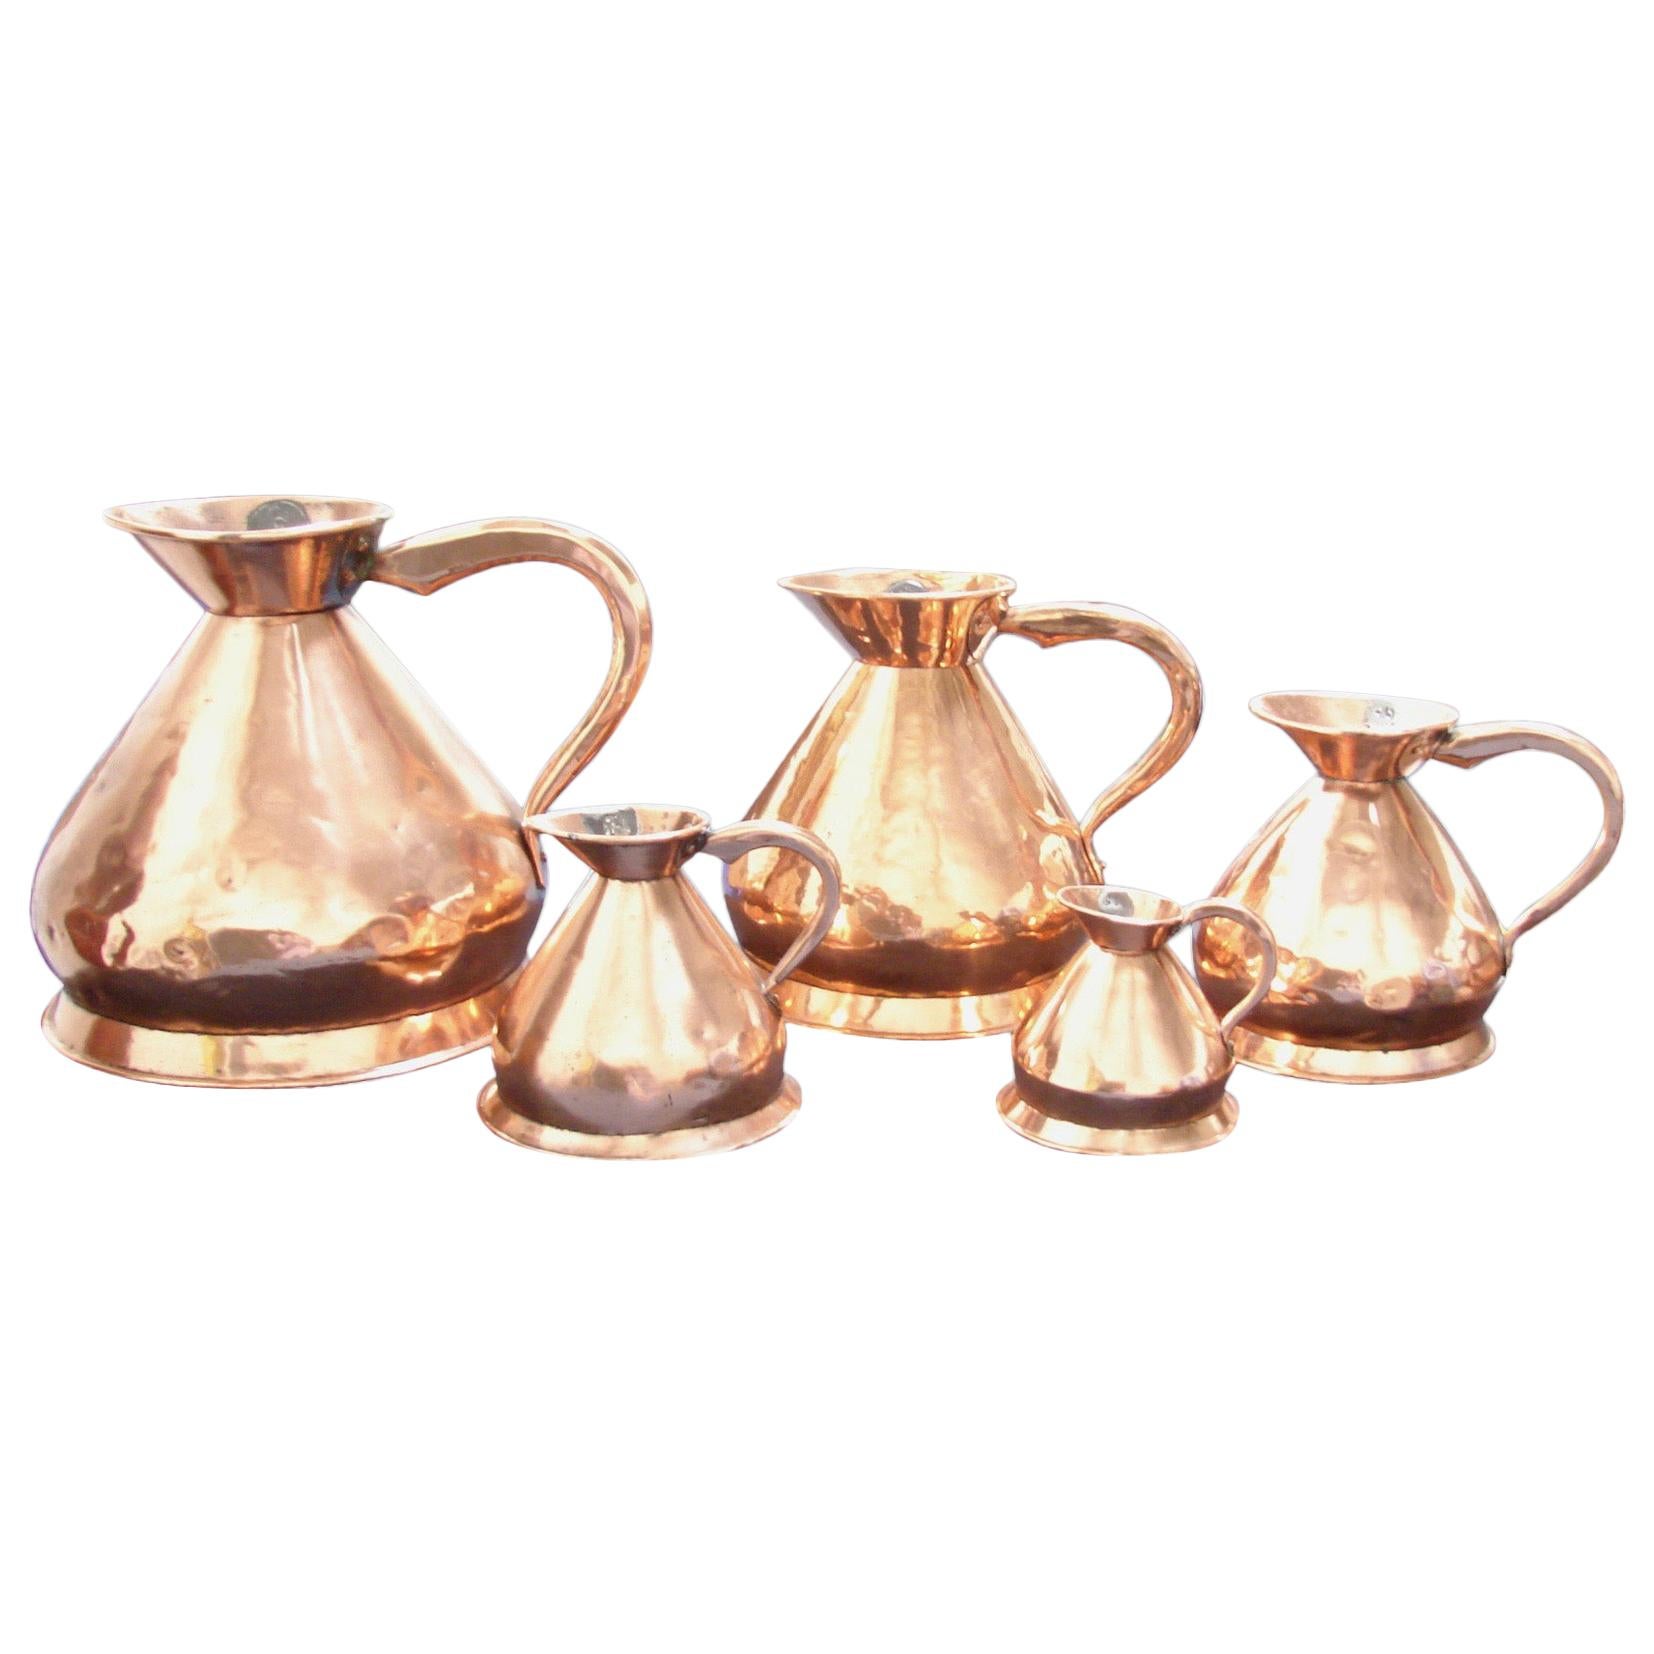 Set of 5 English Copper Graduated Haystack Measures 4 Gallons to 1 Quart